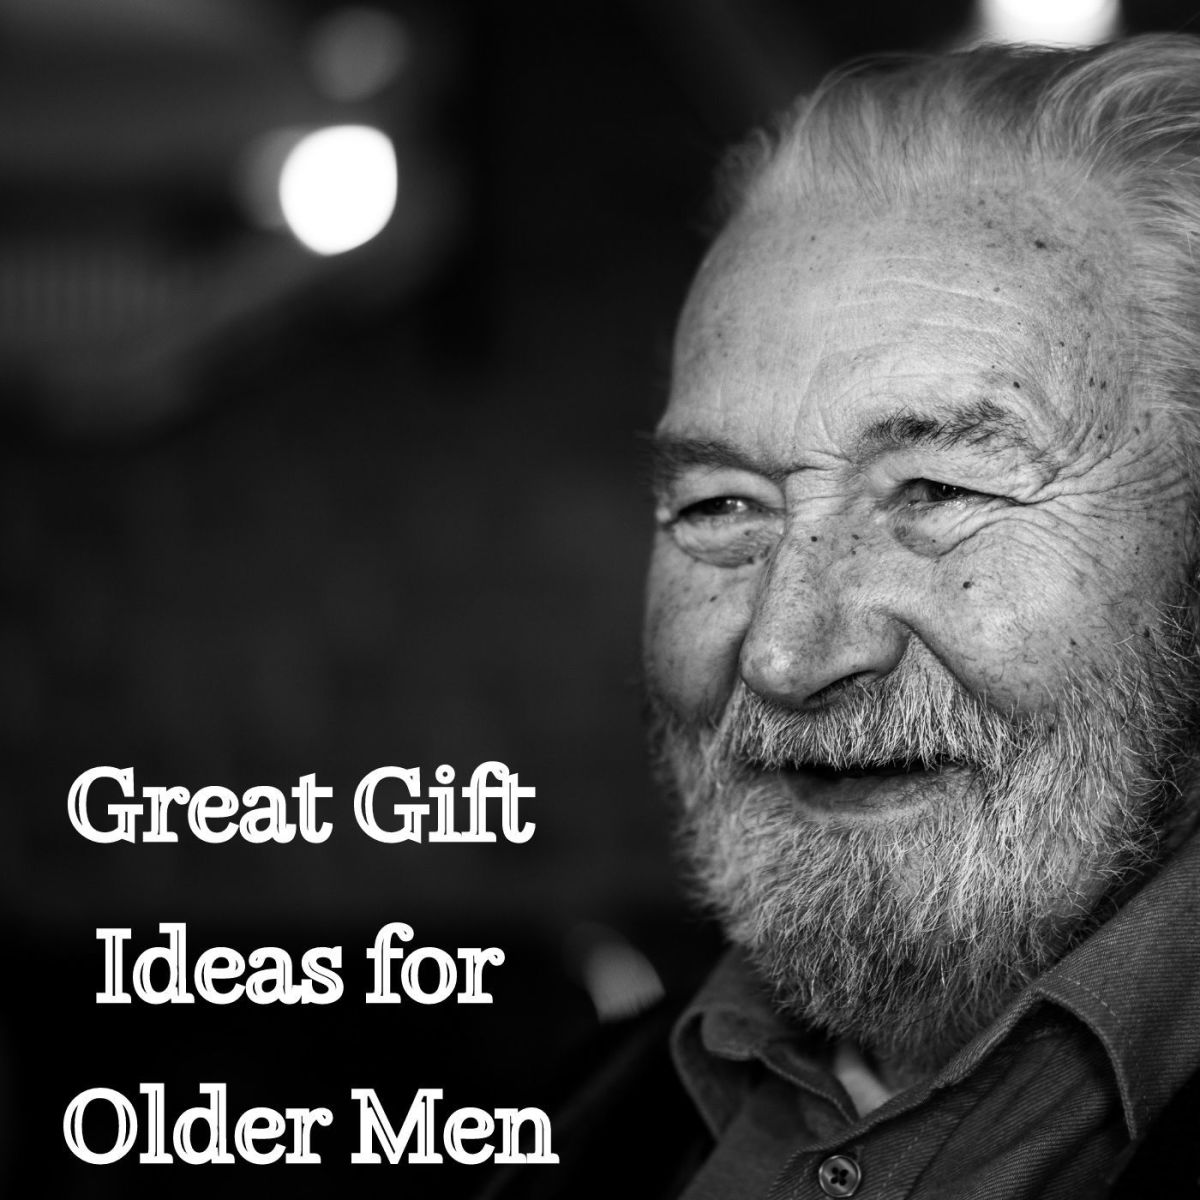 Older men can be hard to shop for. Here are a few gifts that I, an older man, would be delighted to receive. 